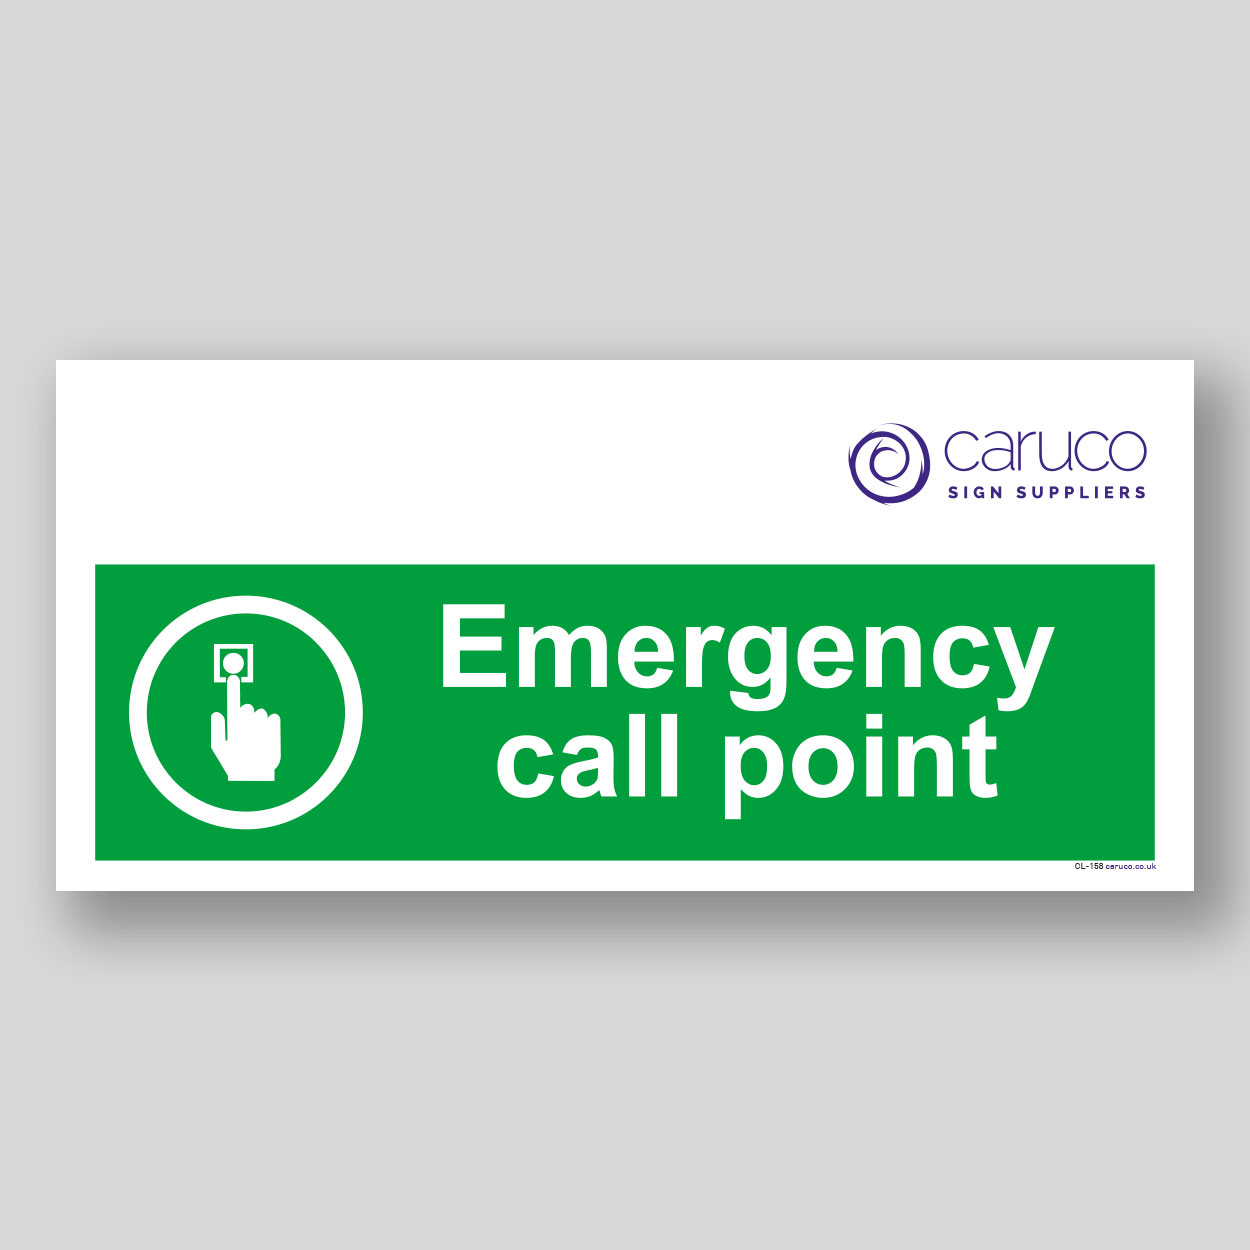 CL-158 Emergency call point